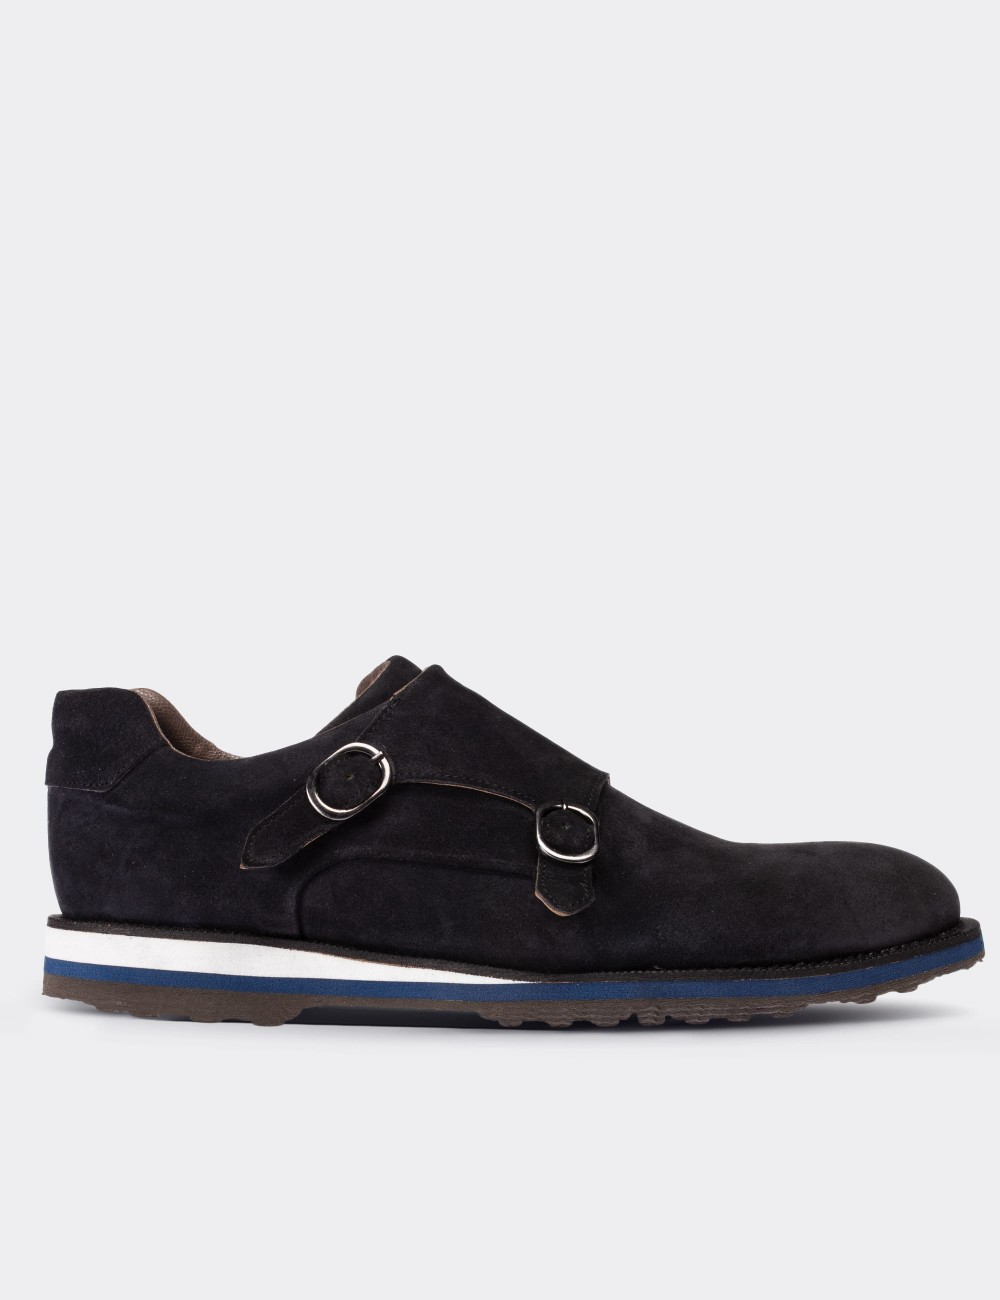 Navy Suede Leather Monk-Strap Lace-up Shoes - 01742MLCVE01